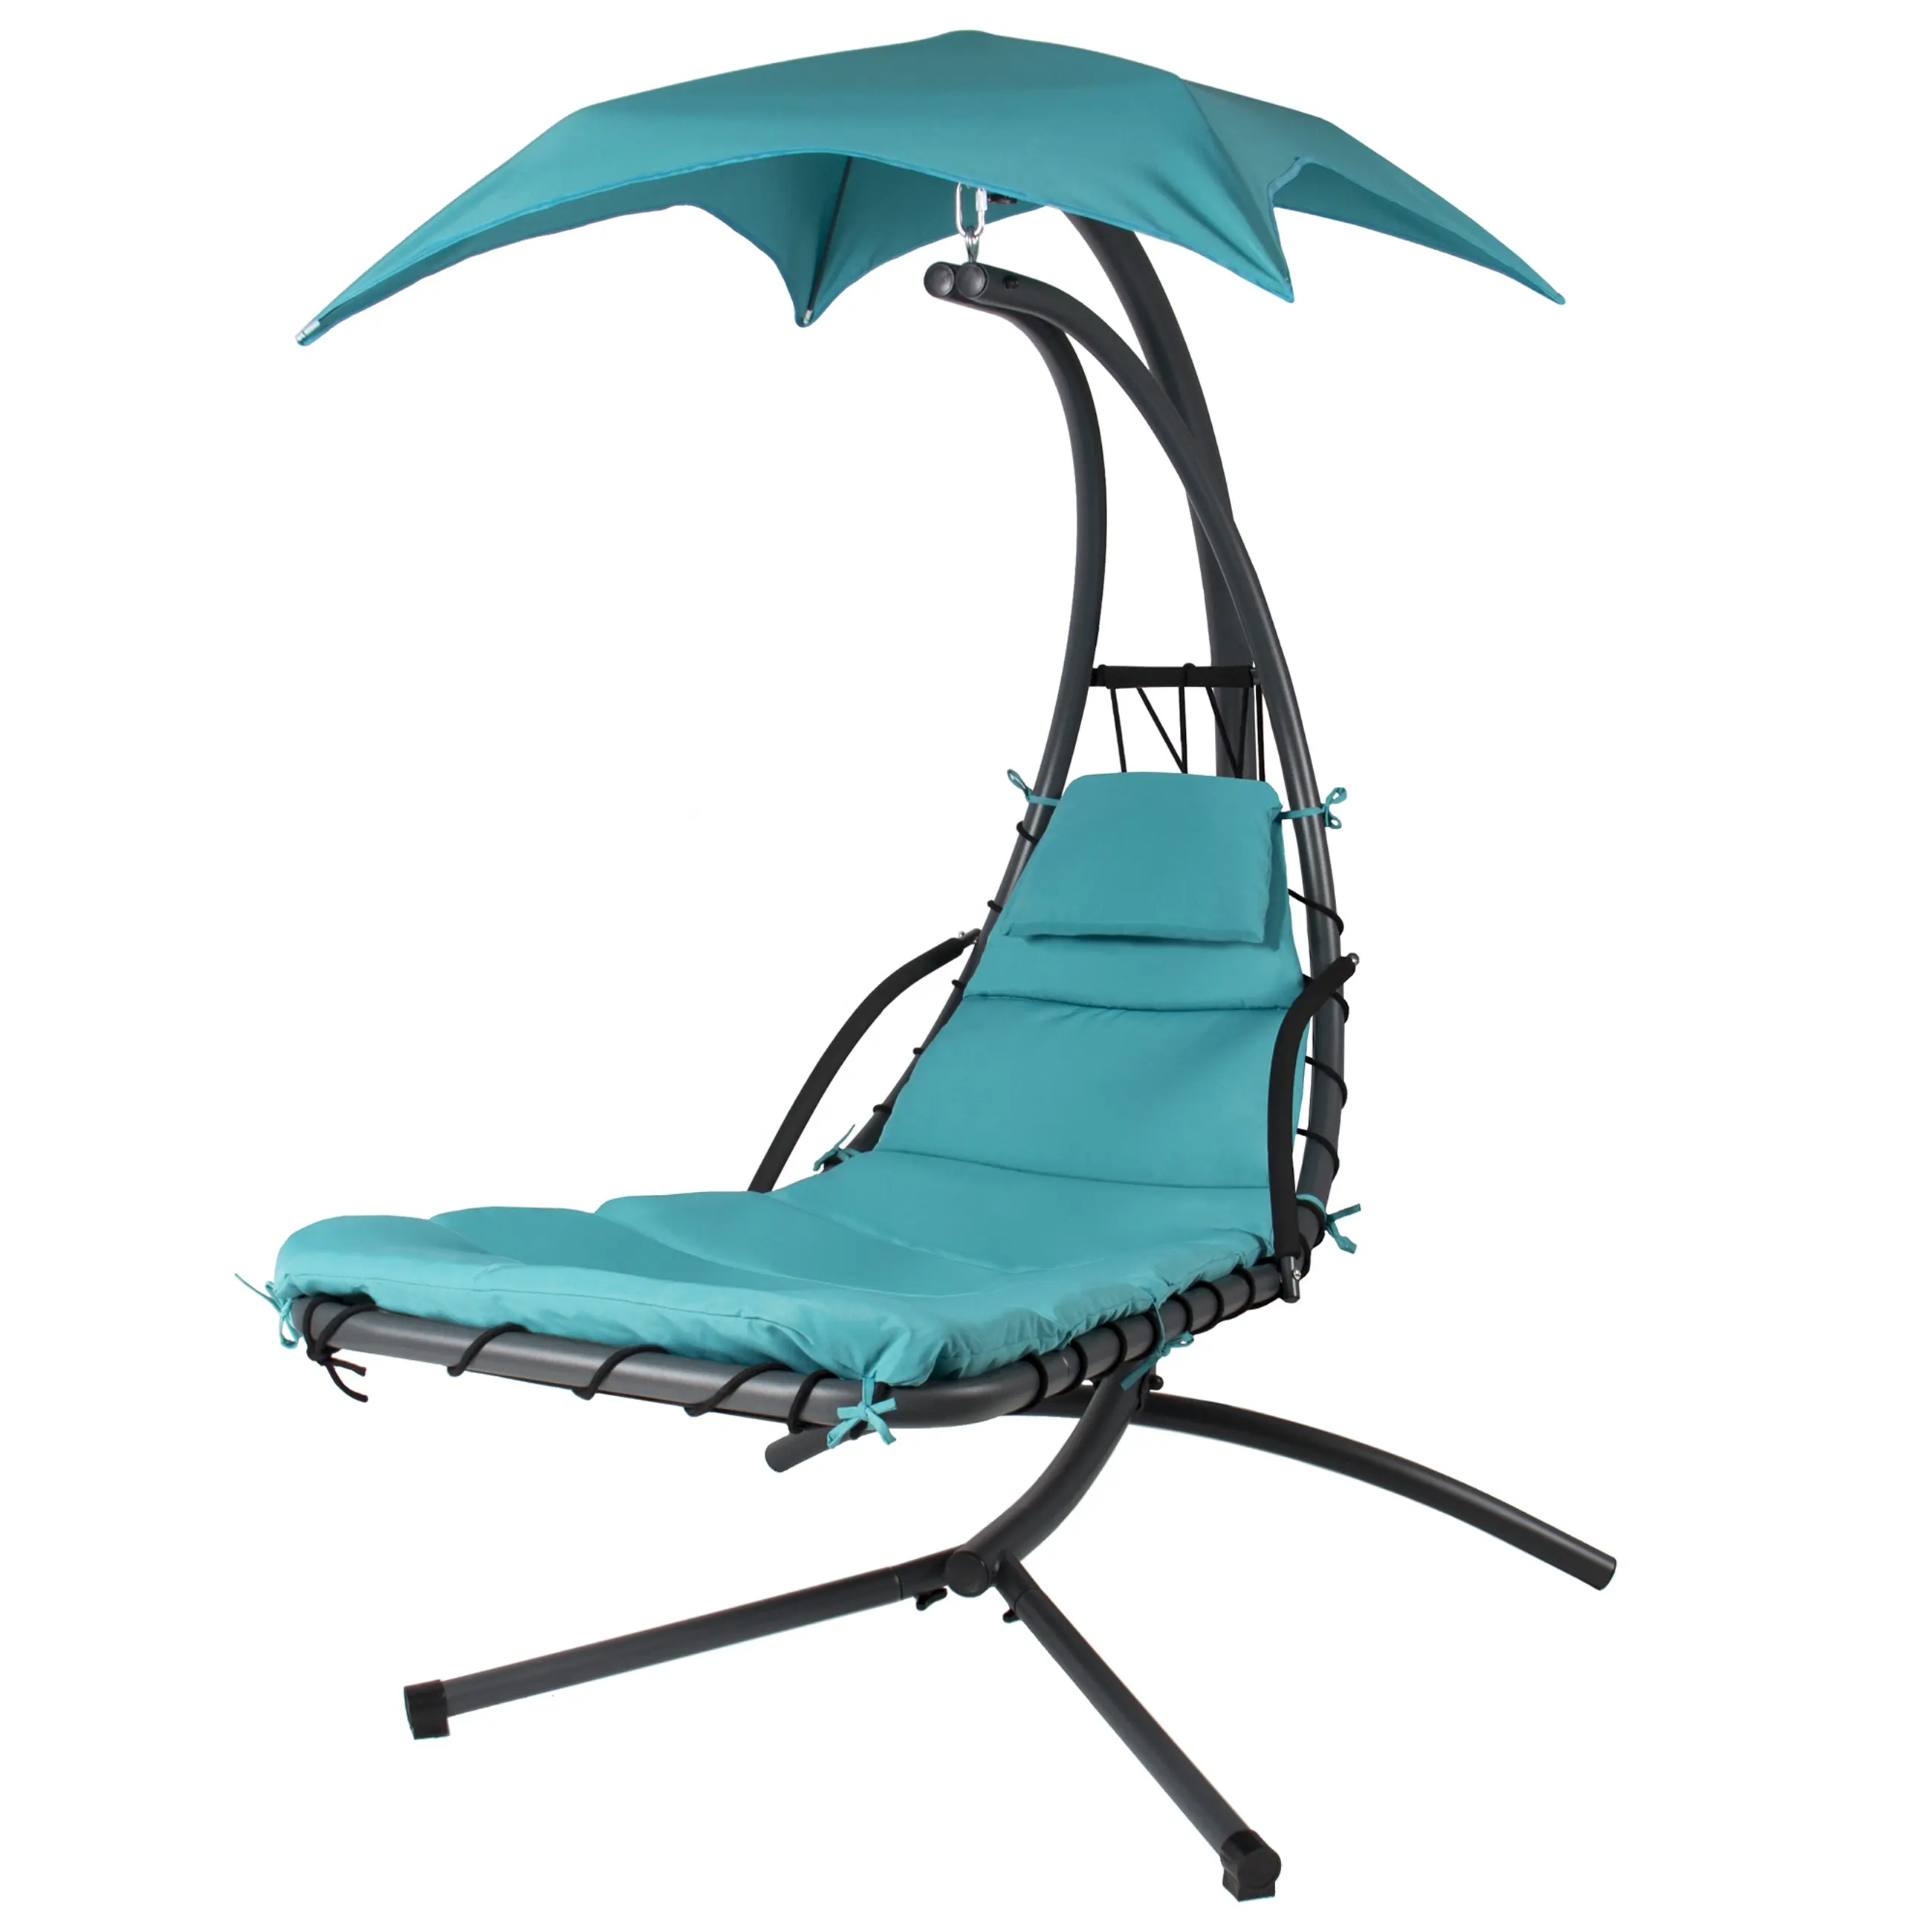 Outdoor Patio Hanging Chaise Lounger Chair Garden Porch Swing Hammock Chair with Canopy